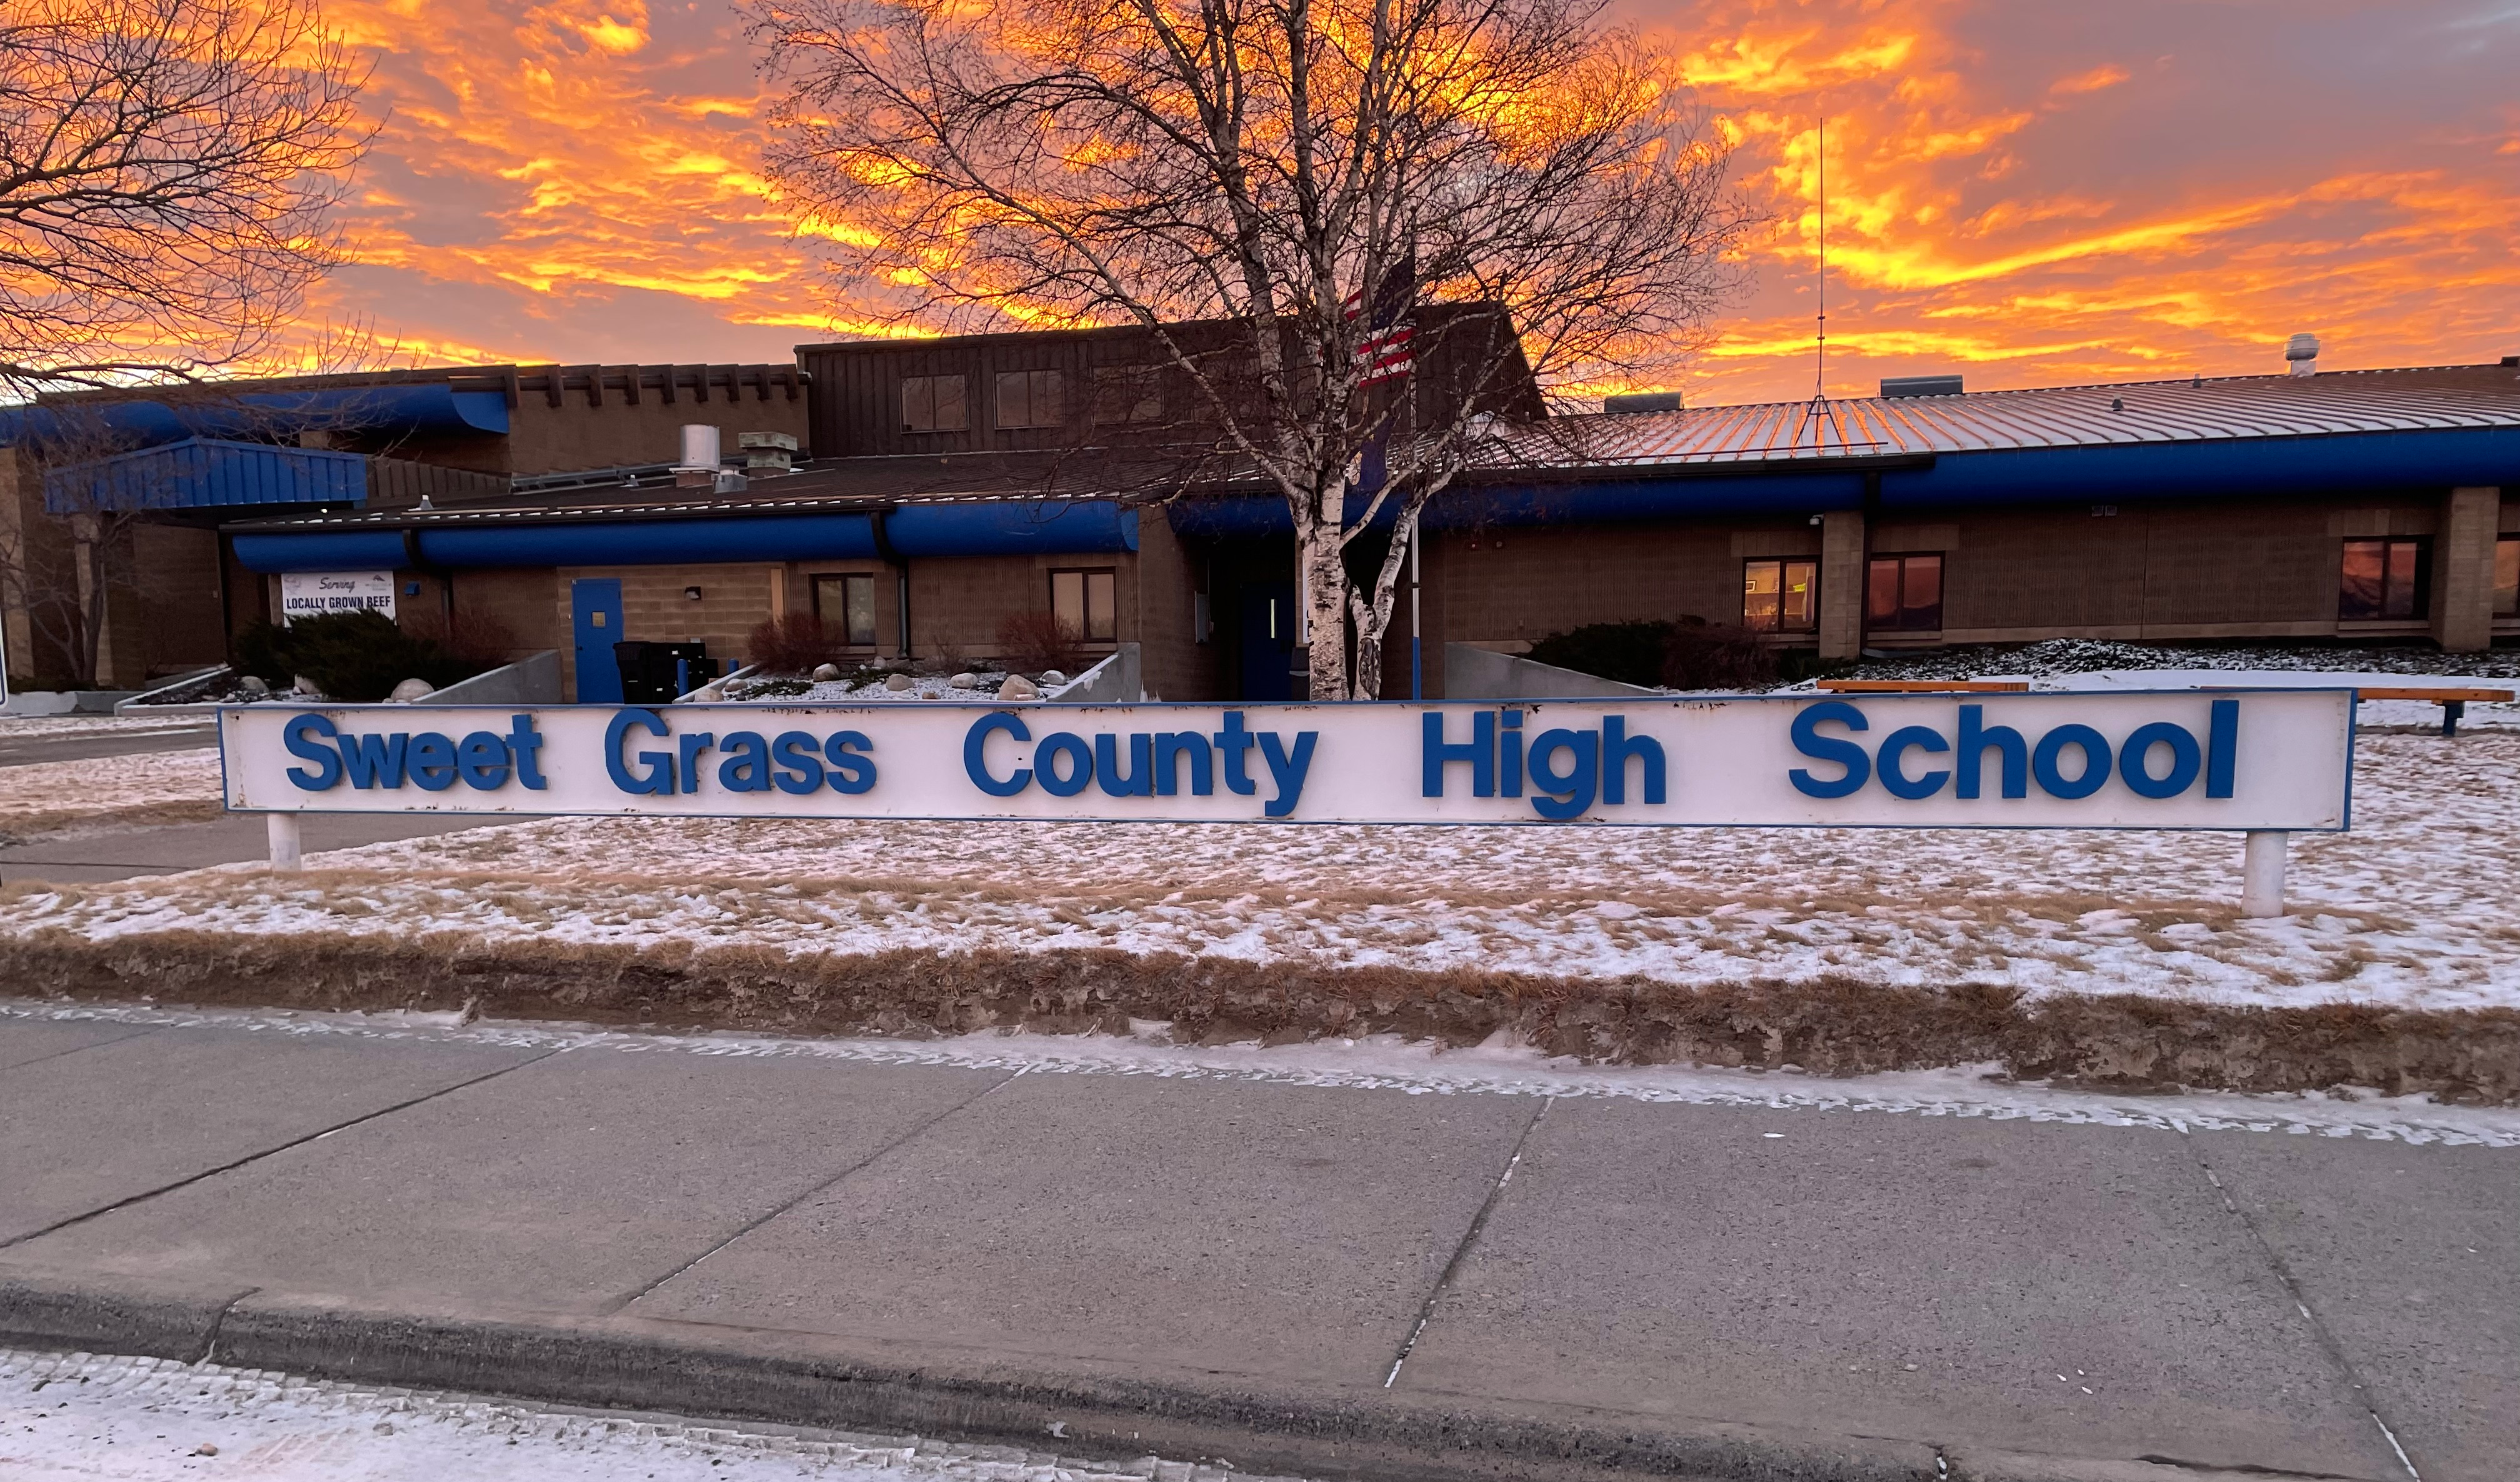 photo of the Sweet Grass County High School sign with the school building behind it and a colorful morning sunrise behind the building